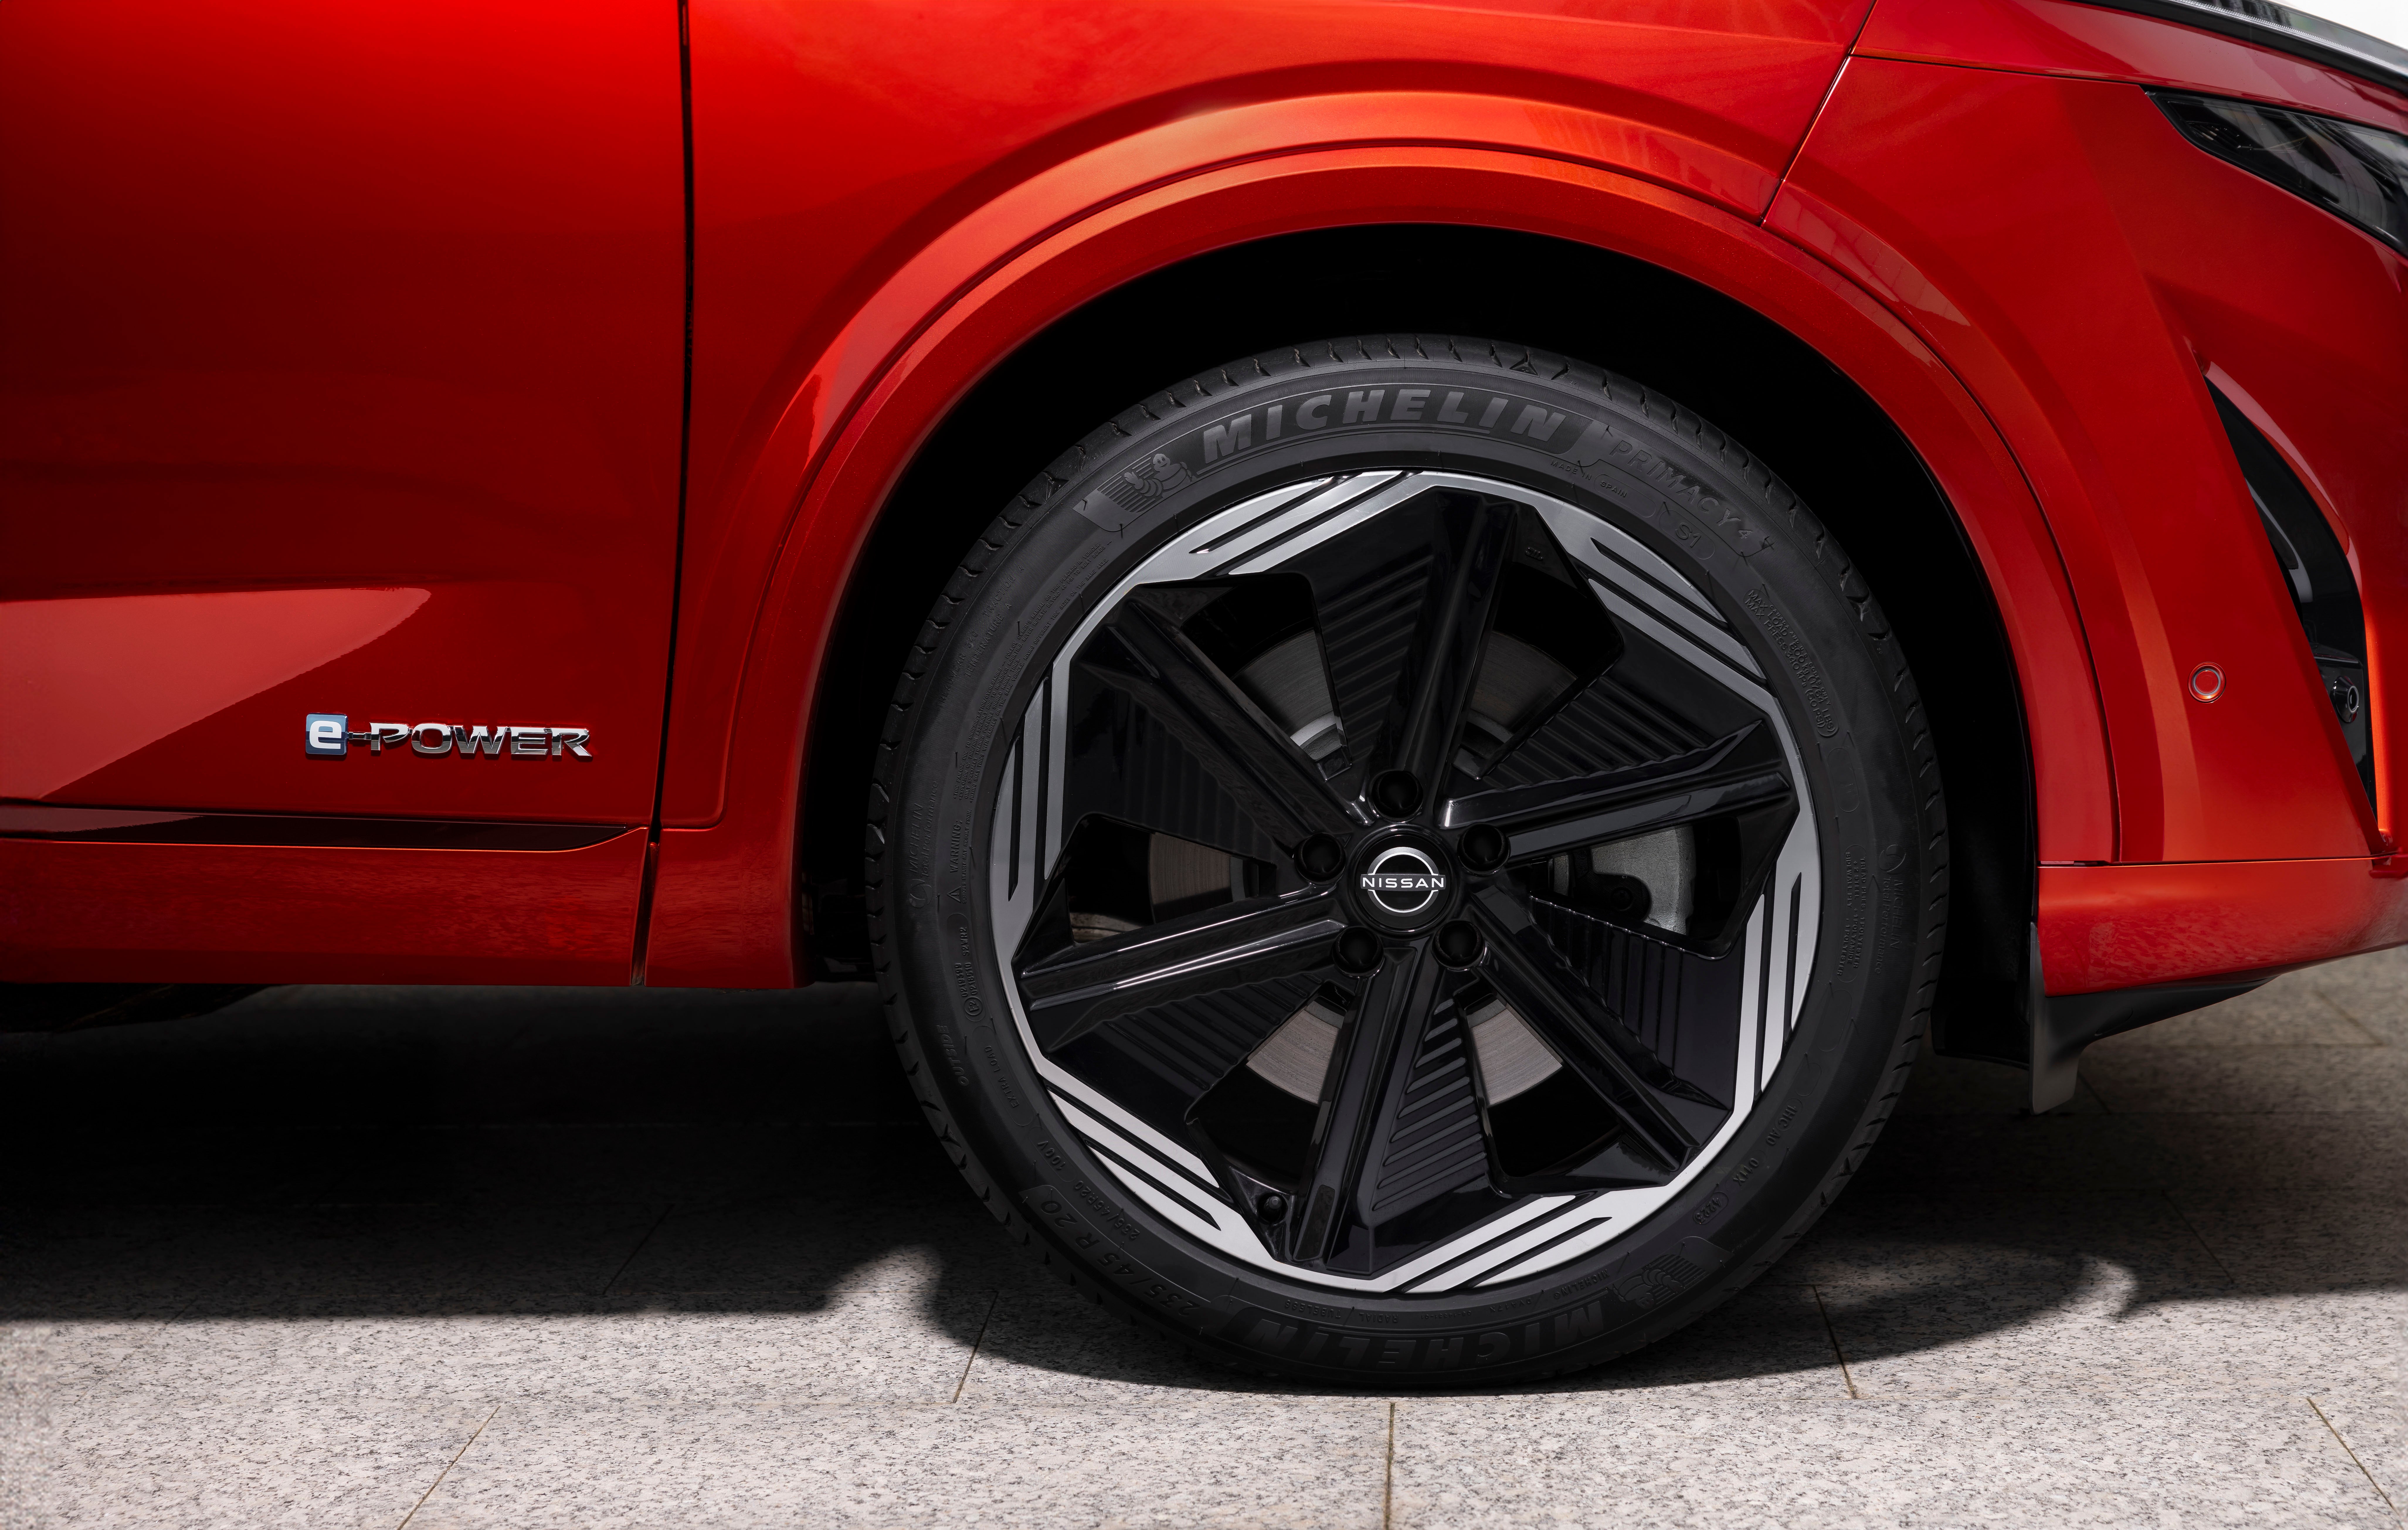 Subtle touches include finishing the wheel arch in body color instead of black.